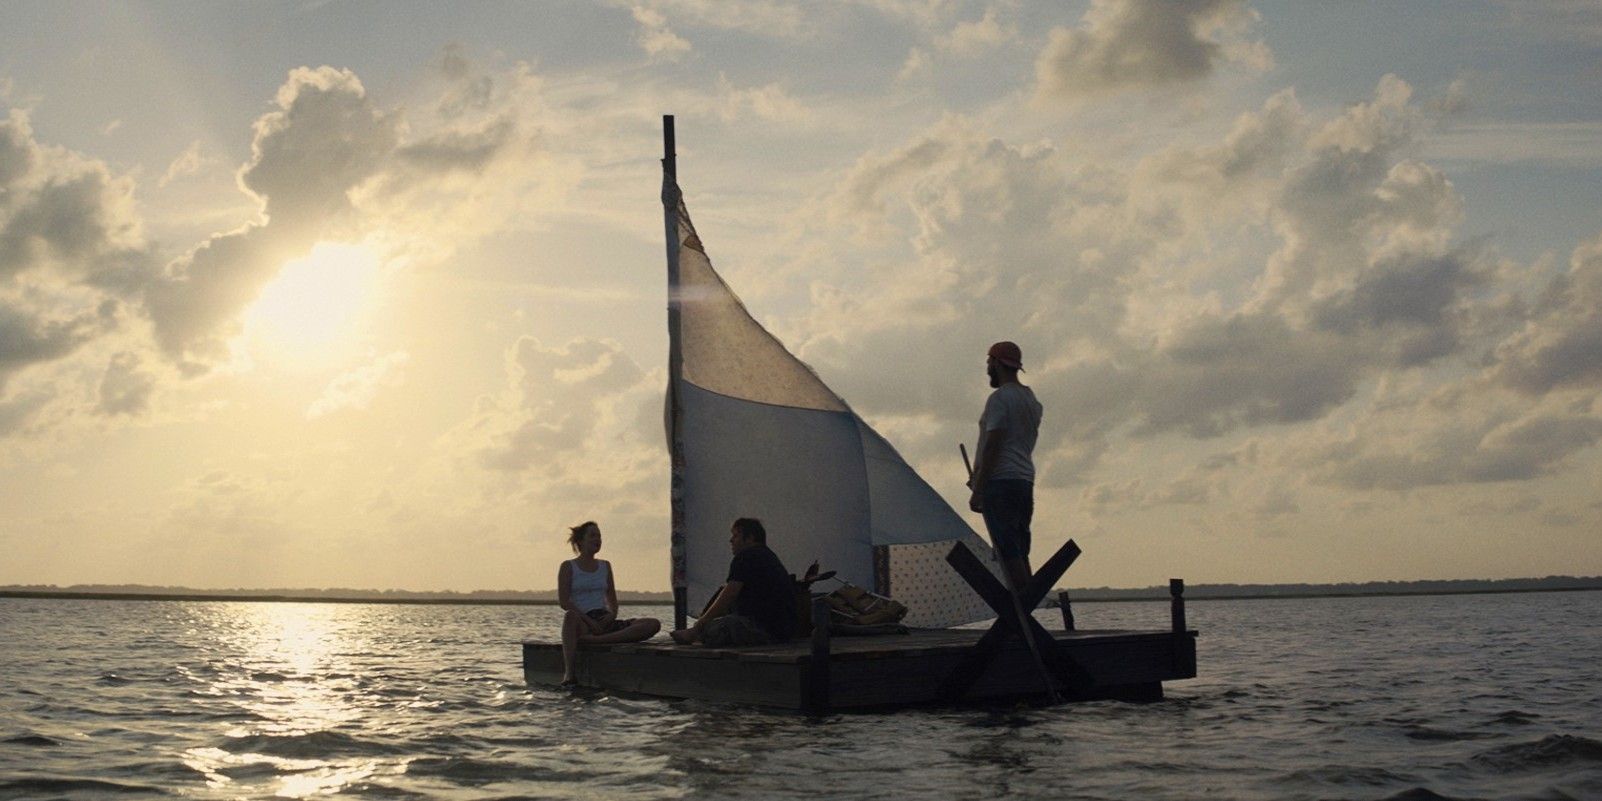 A sailboat on the ocean in The Peanut Butter Falcon